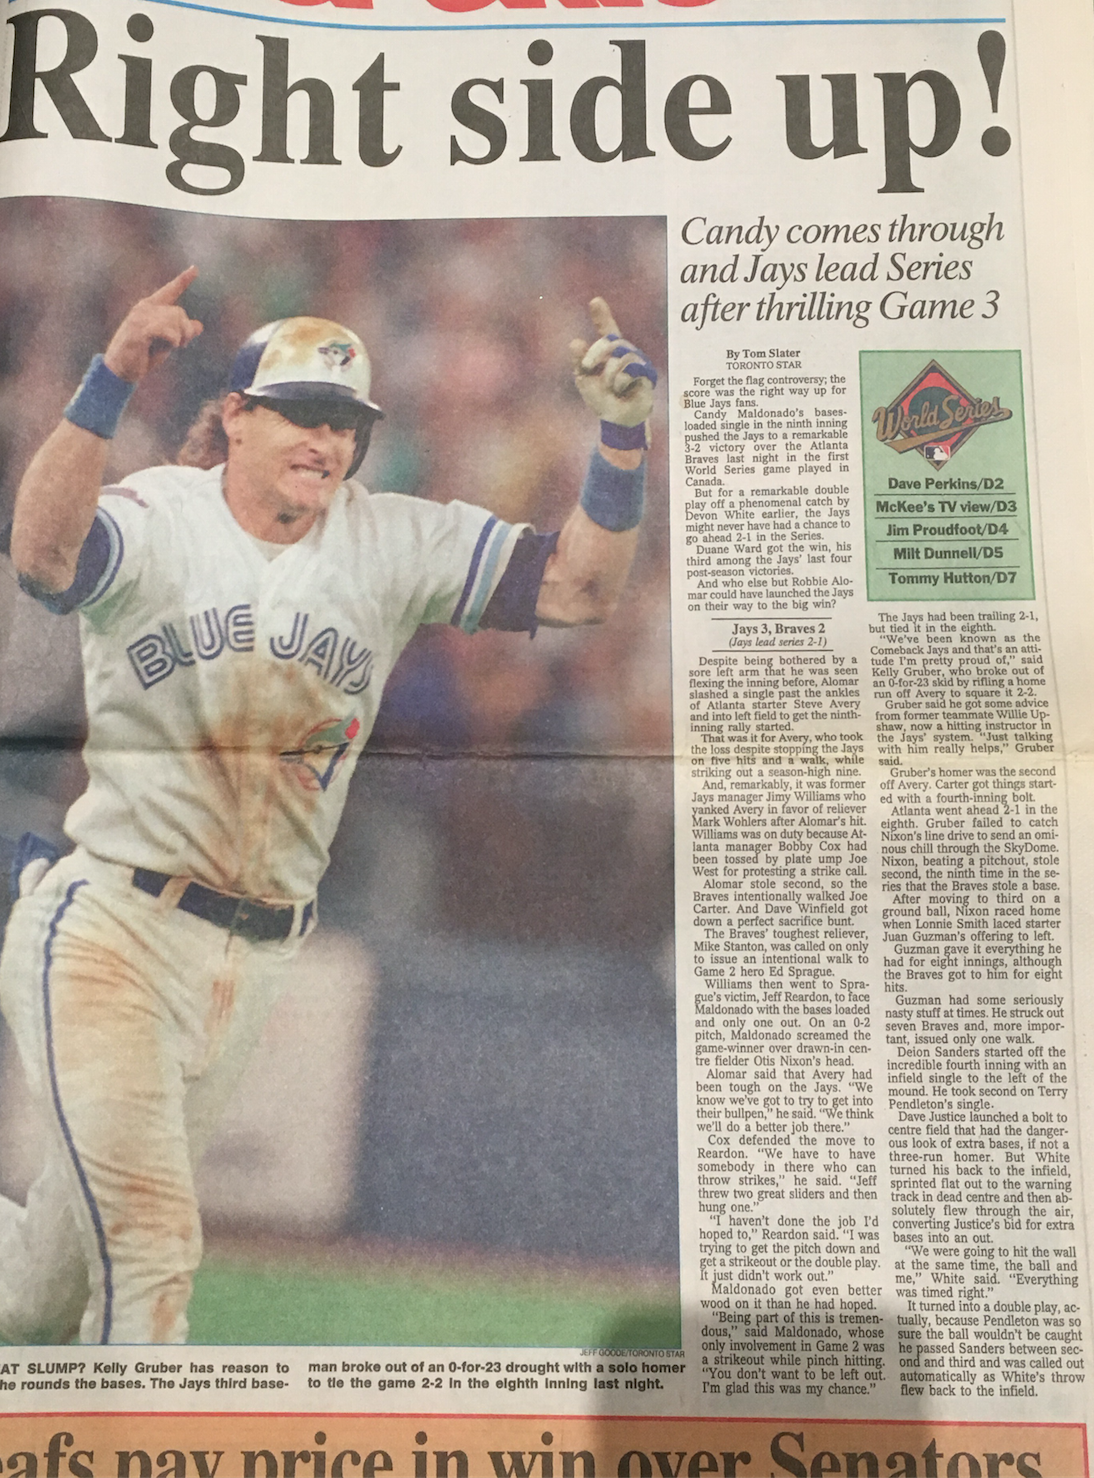 Blue Jays Time Capsule: Braves take Game 1 of '92 World Series